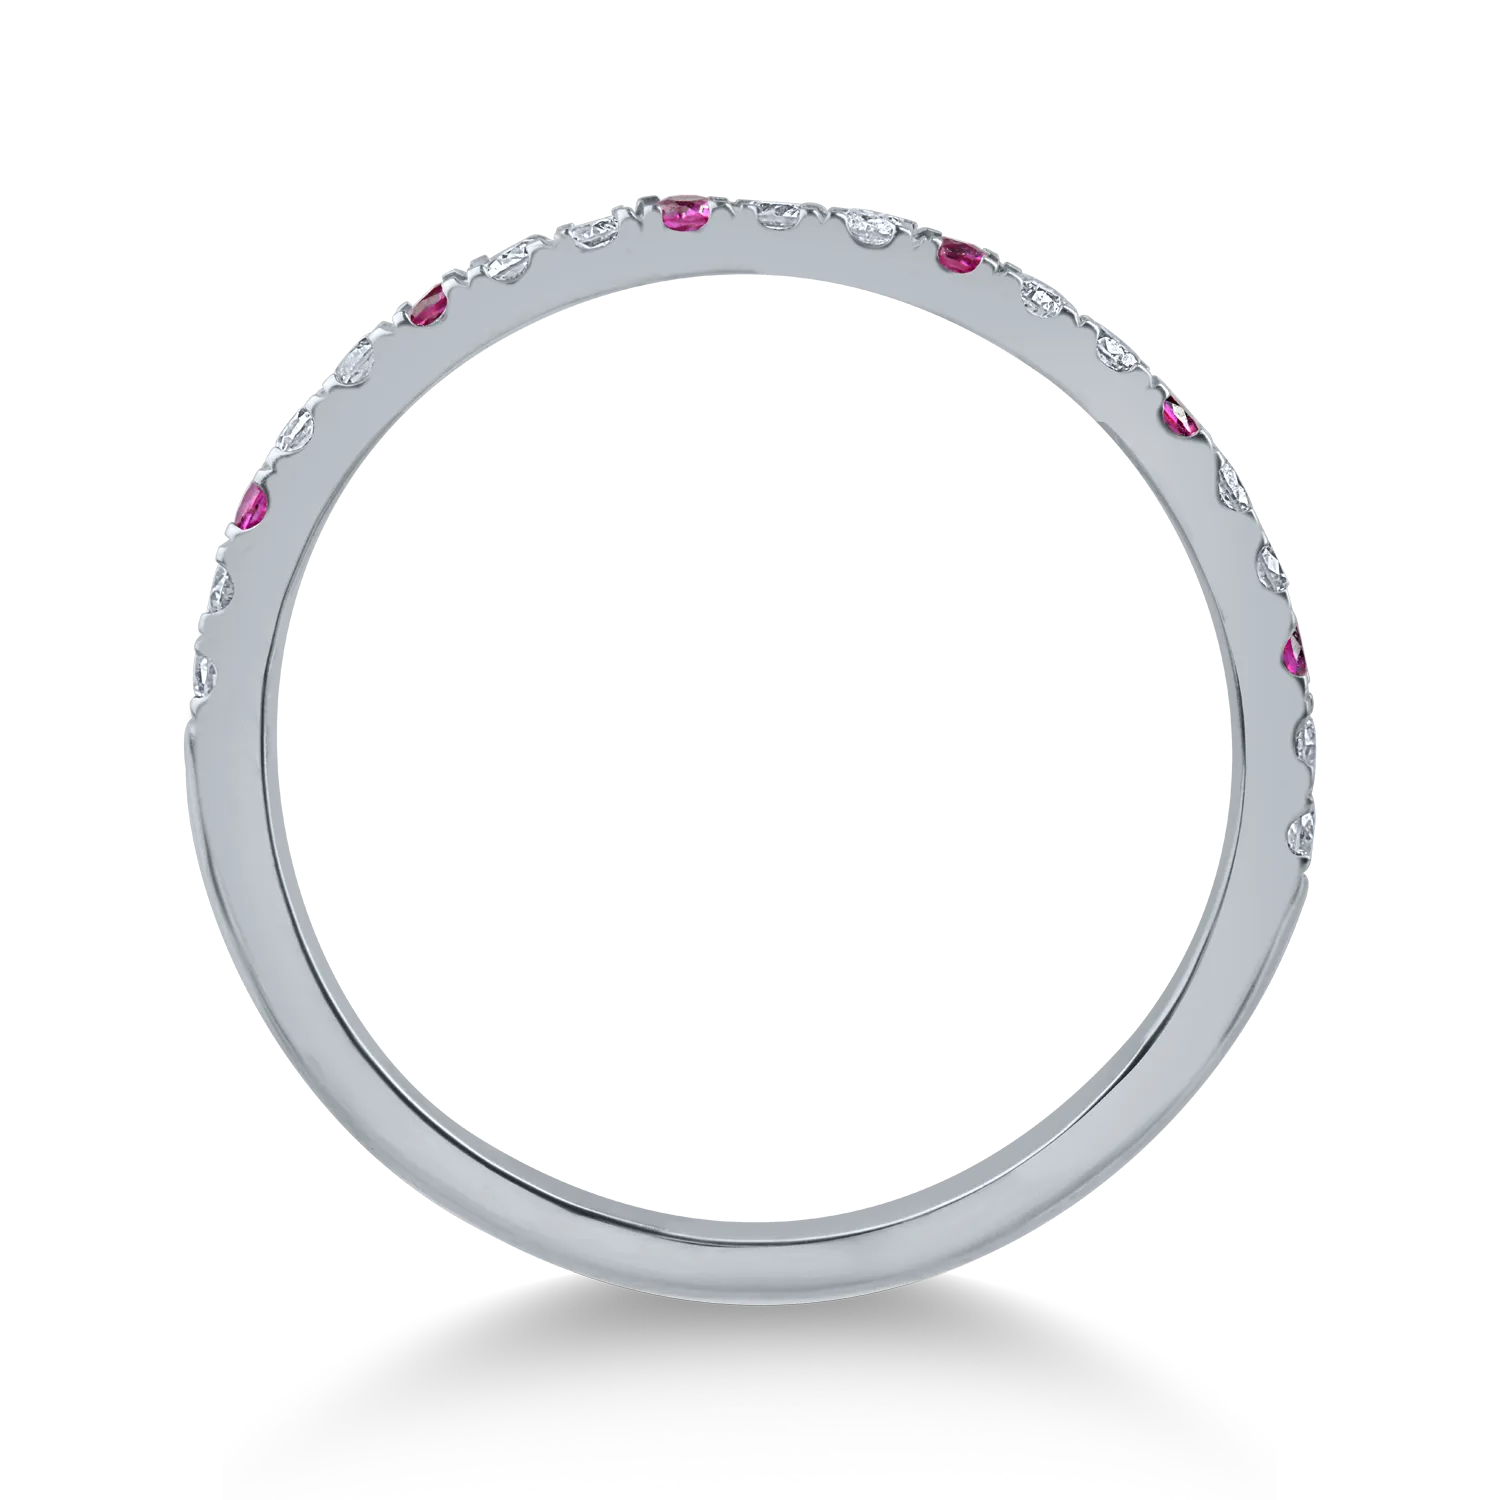 Half eternity ring in white gold with 0.12ct rubies and 0.19ct diamonds